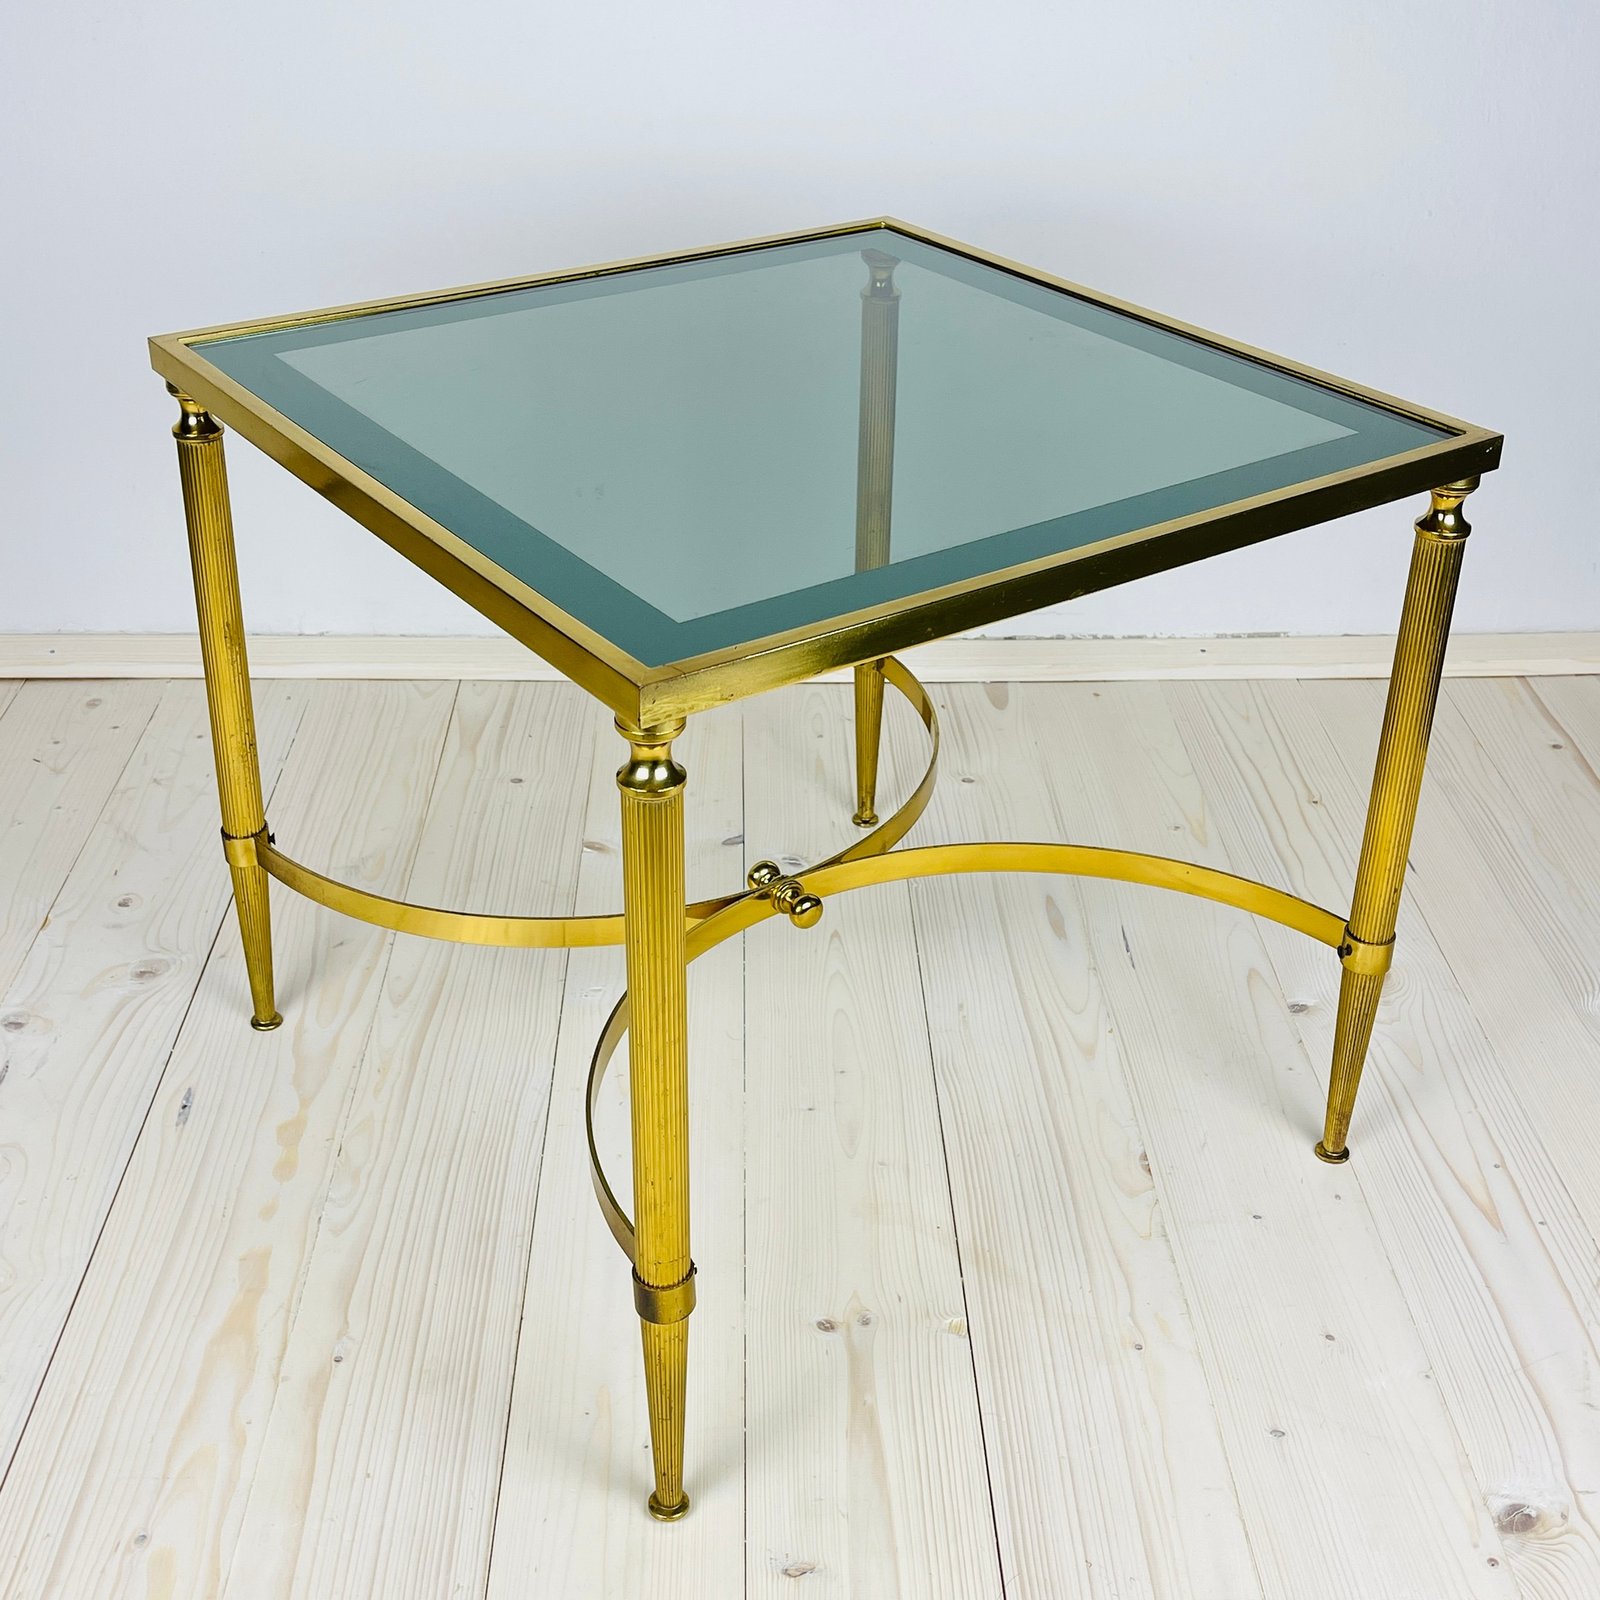 Vintage coffee table Italy 1970s Mid-century drink table Art deco Smoked Glass & Brass Table